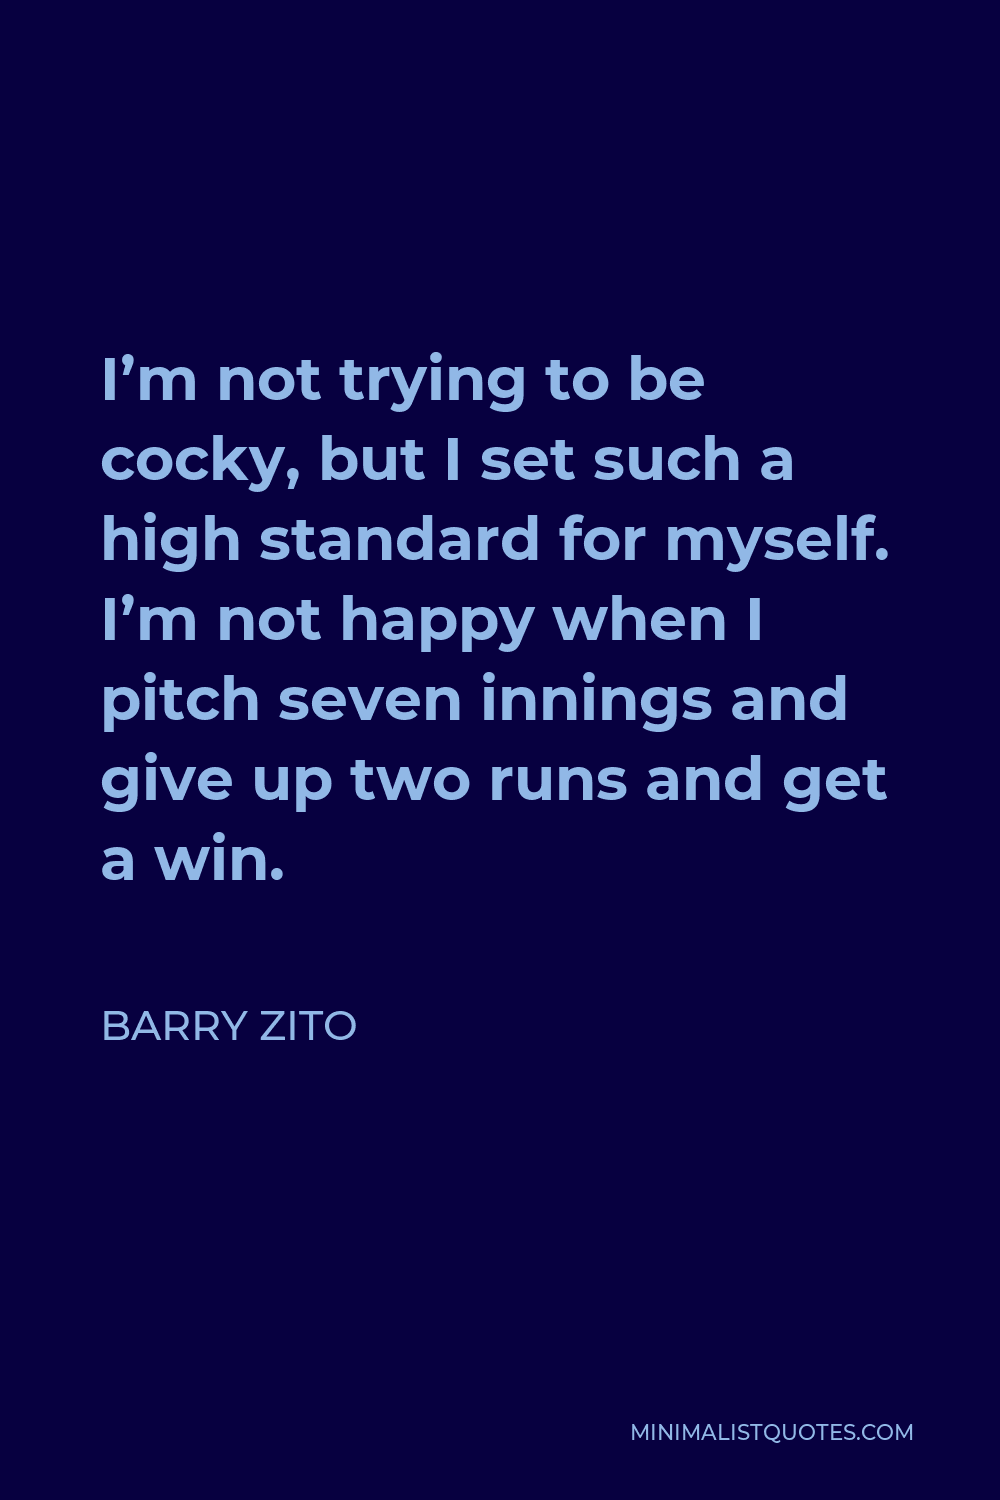 Barry Zito Quote - I’m not trying to be cocky, but I set such a high standard for myself. I’m not happy when I pitch seven innings and give up two runs and get a win.